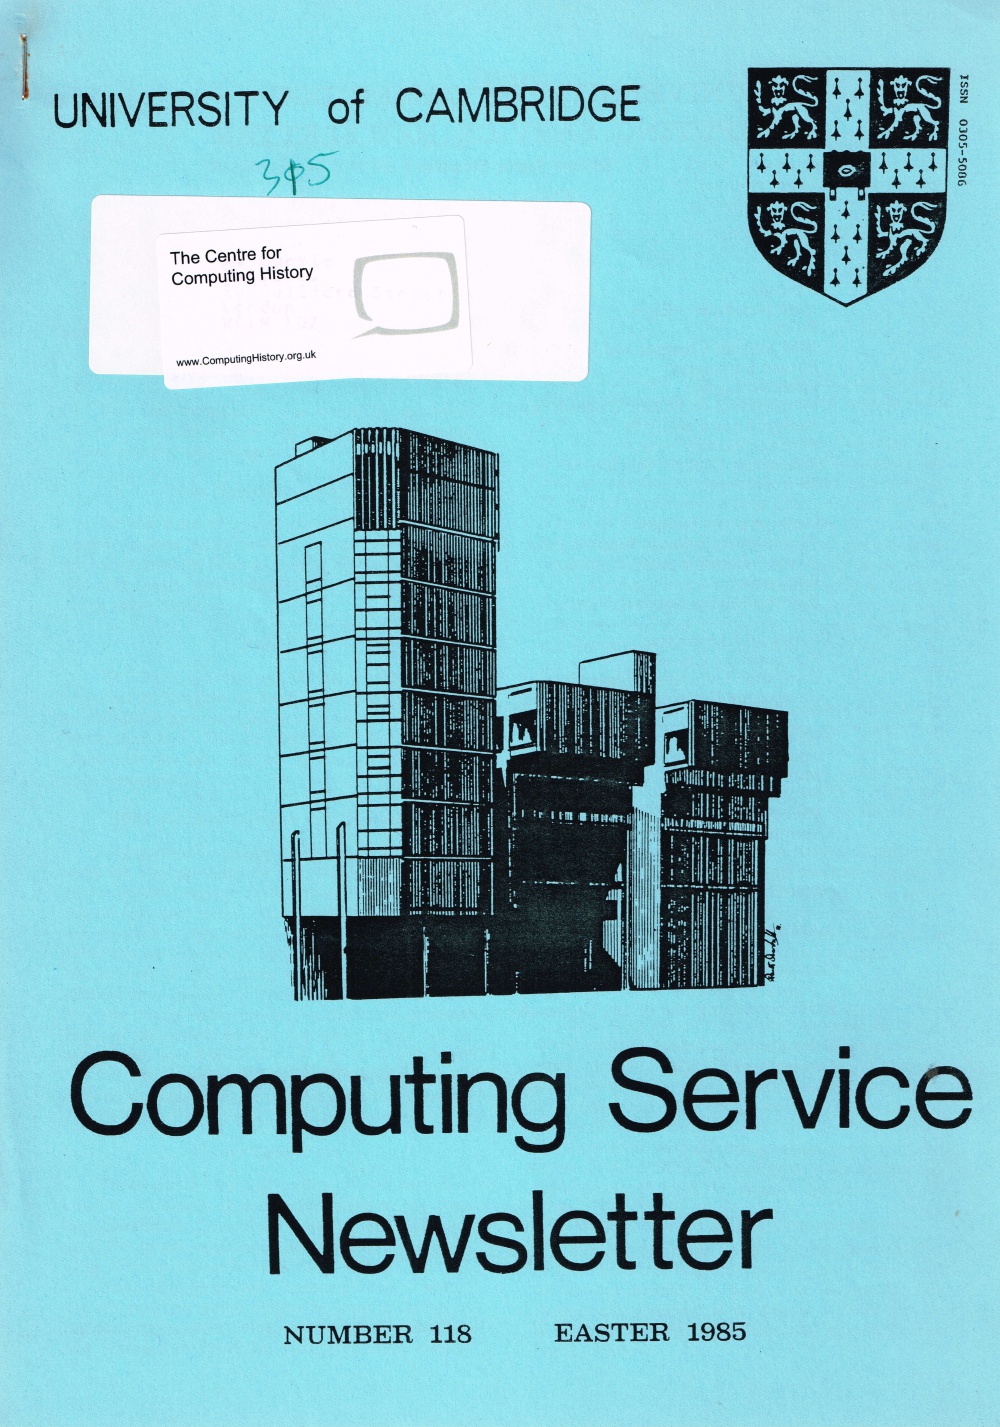 Article: University of Cambridge Computing Service Easter 1985 Newsletter 118